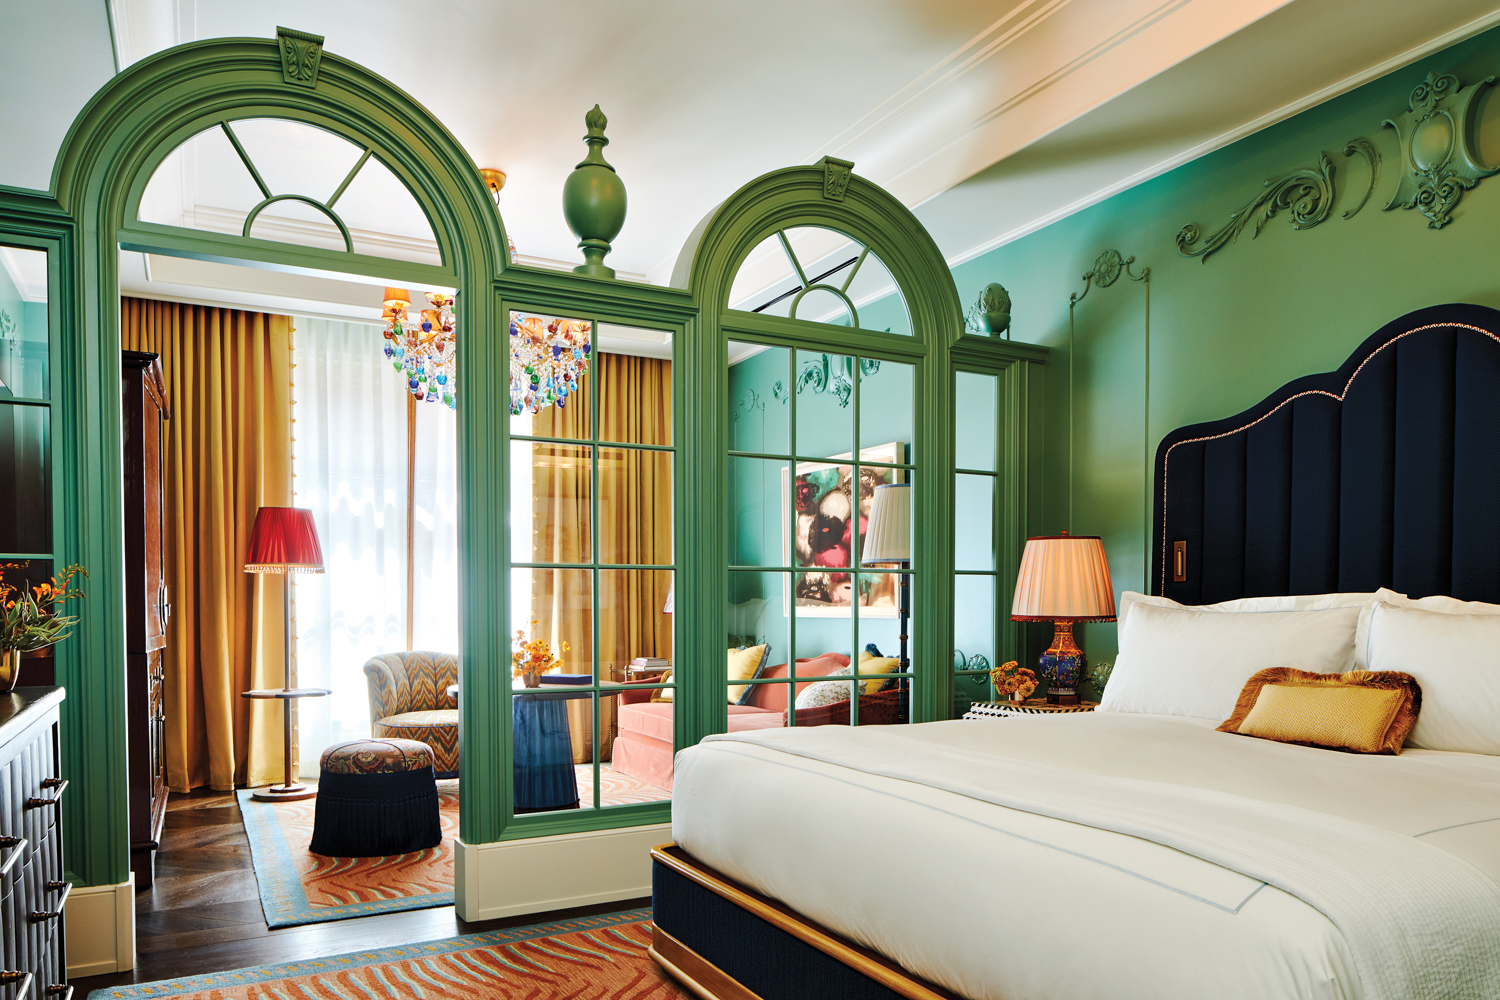 A hotel suite at Fifth Avenue Hotel, with green walls and Gilded Age-inspired decor and furniture.